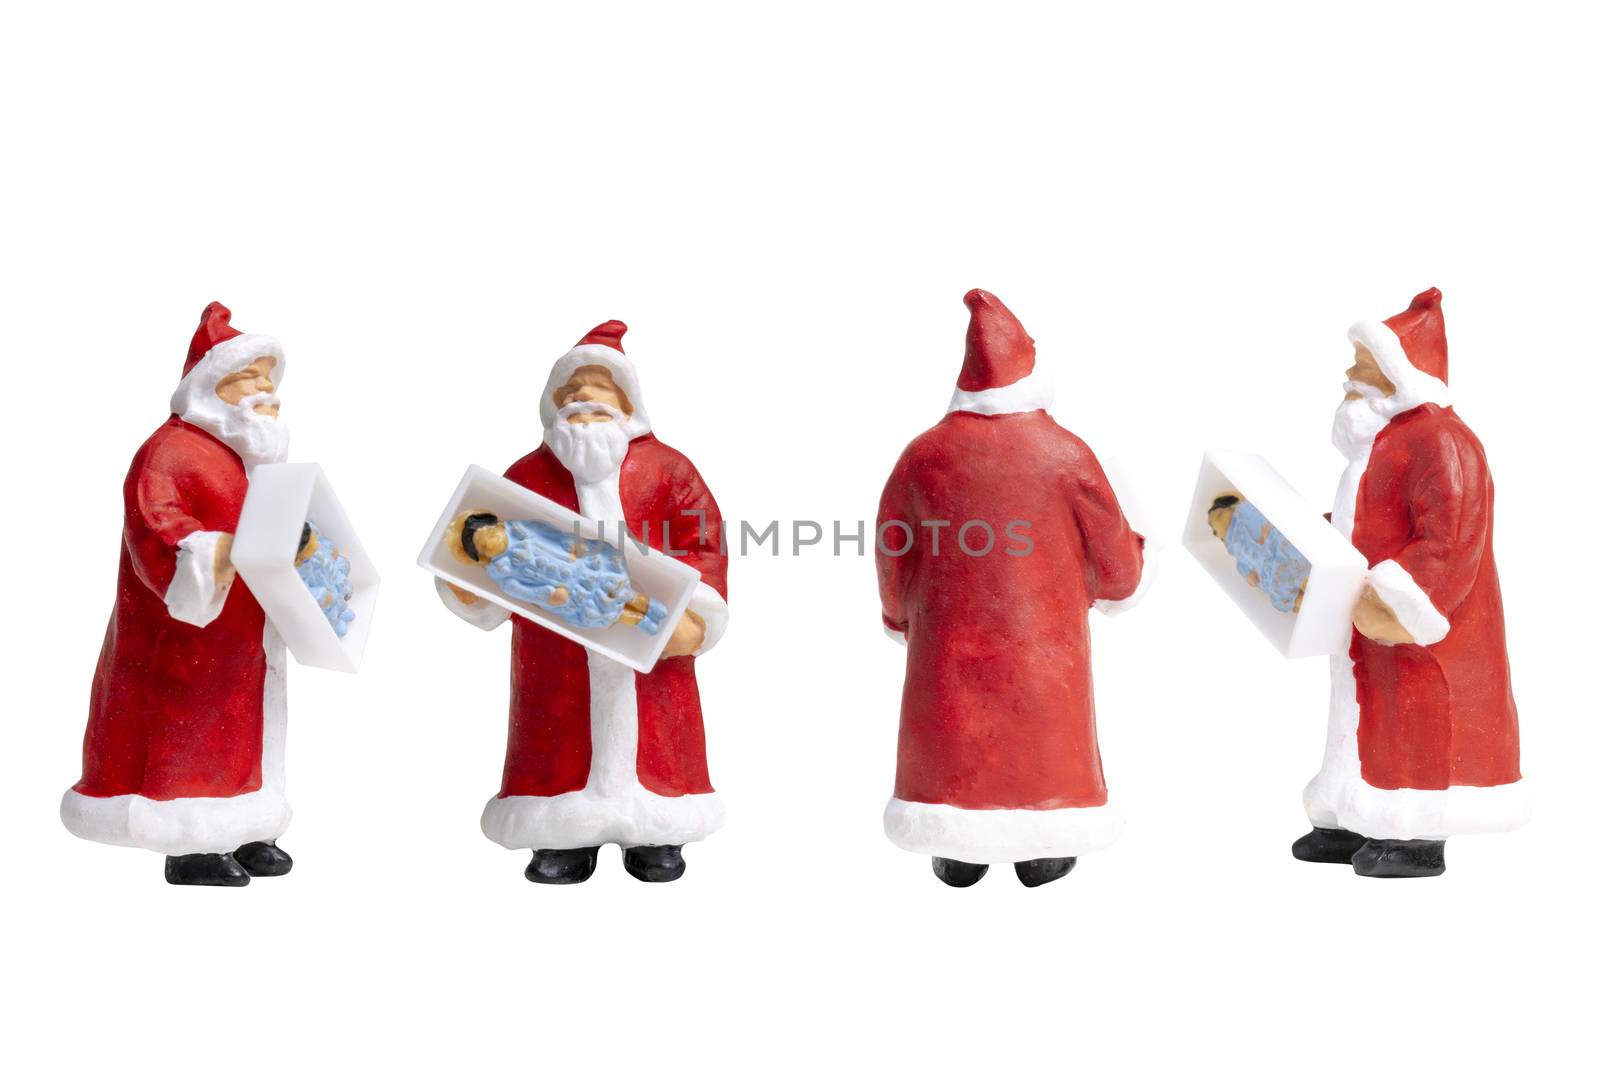 Miniature people Santa Claus holding gift box  isolated on white background with clipping path